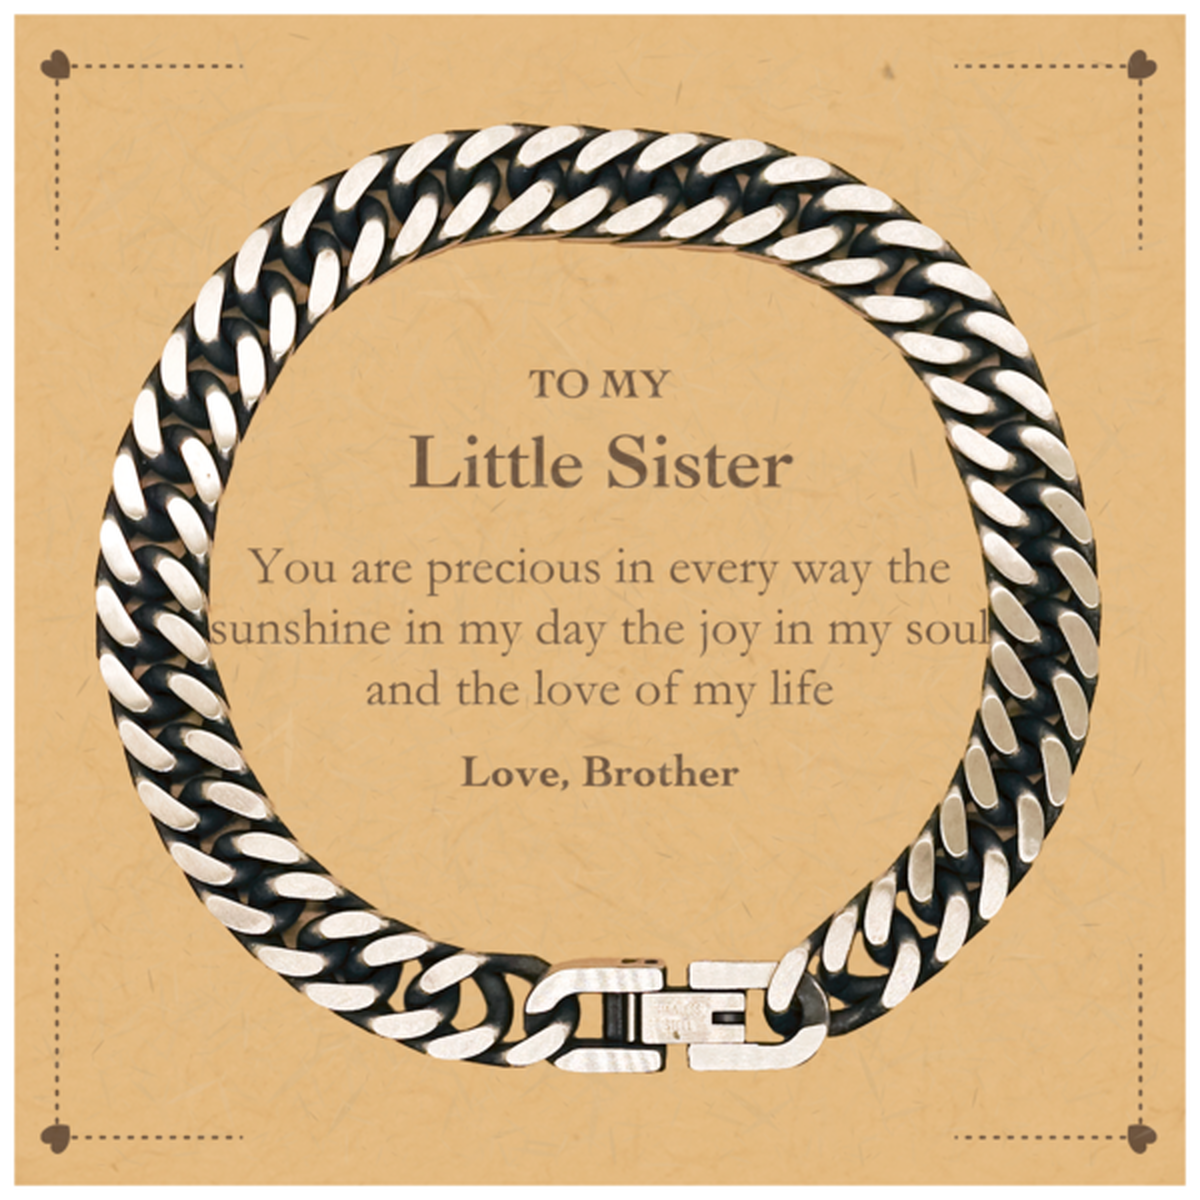 Graduation Gifts for Little Sister Cuban Link Chain Bracelet Present from Brother, Christmas Little Sister Birthday Gifts Little Sister You are precious in every way the sunshine in my day. Love, Brother